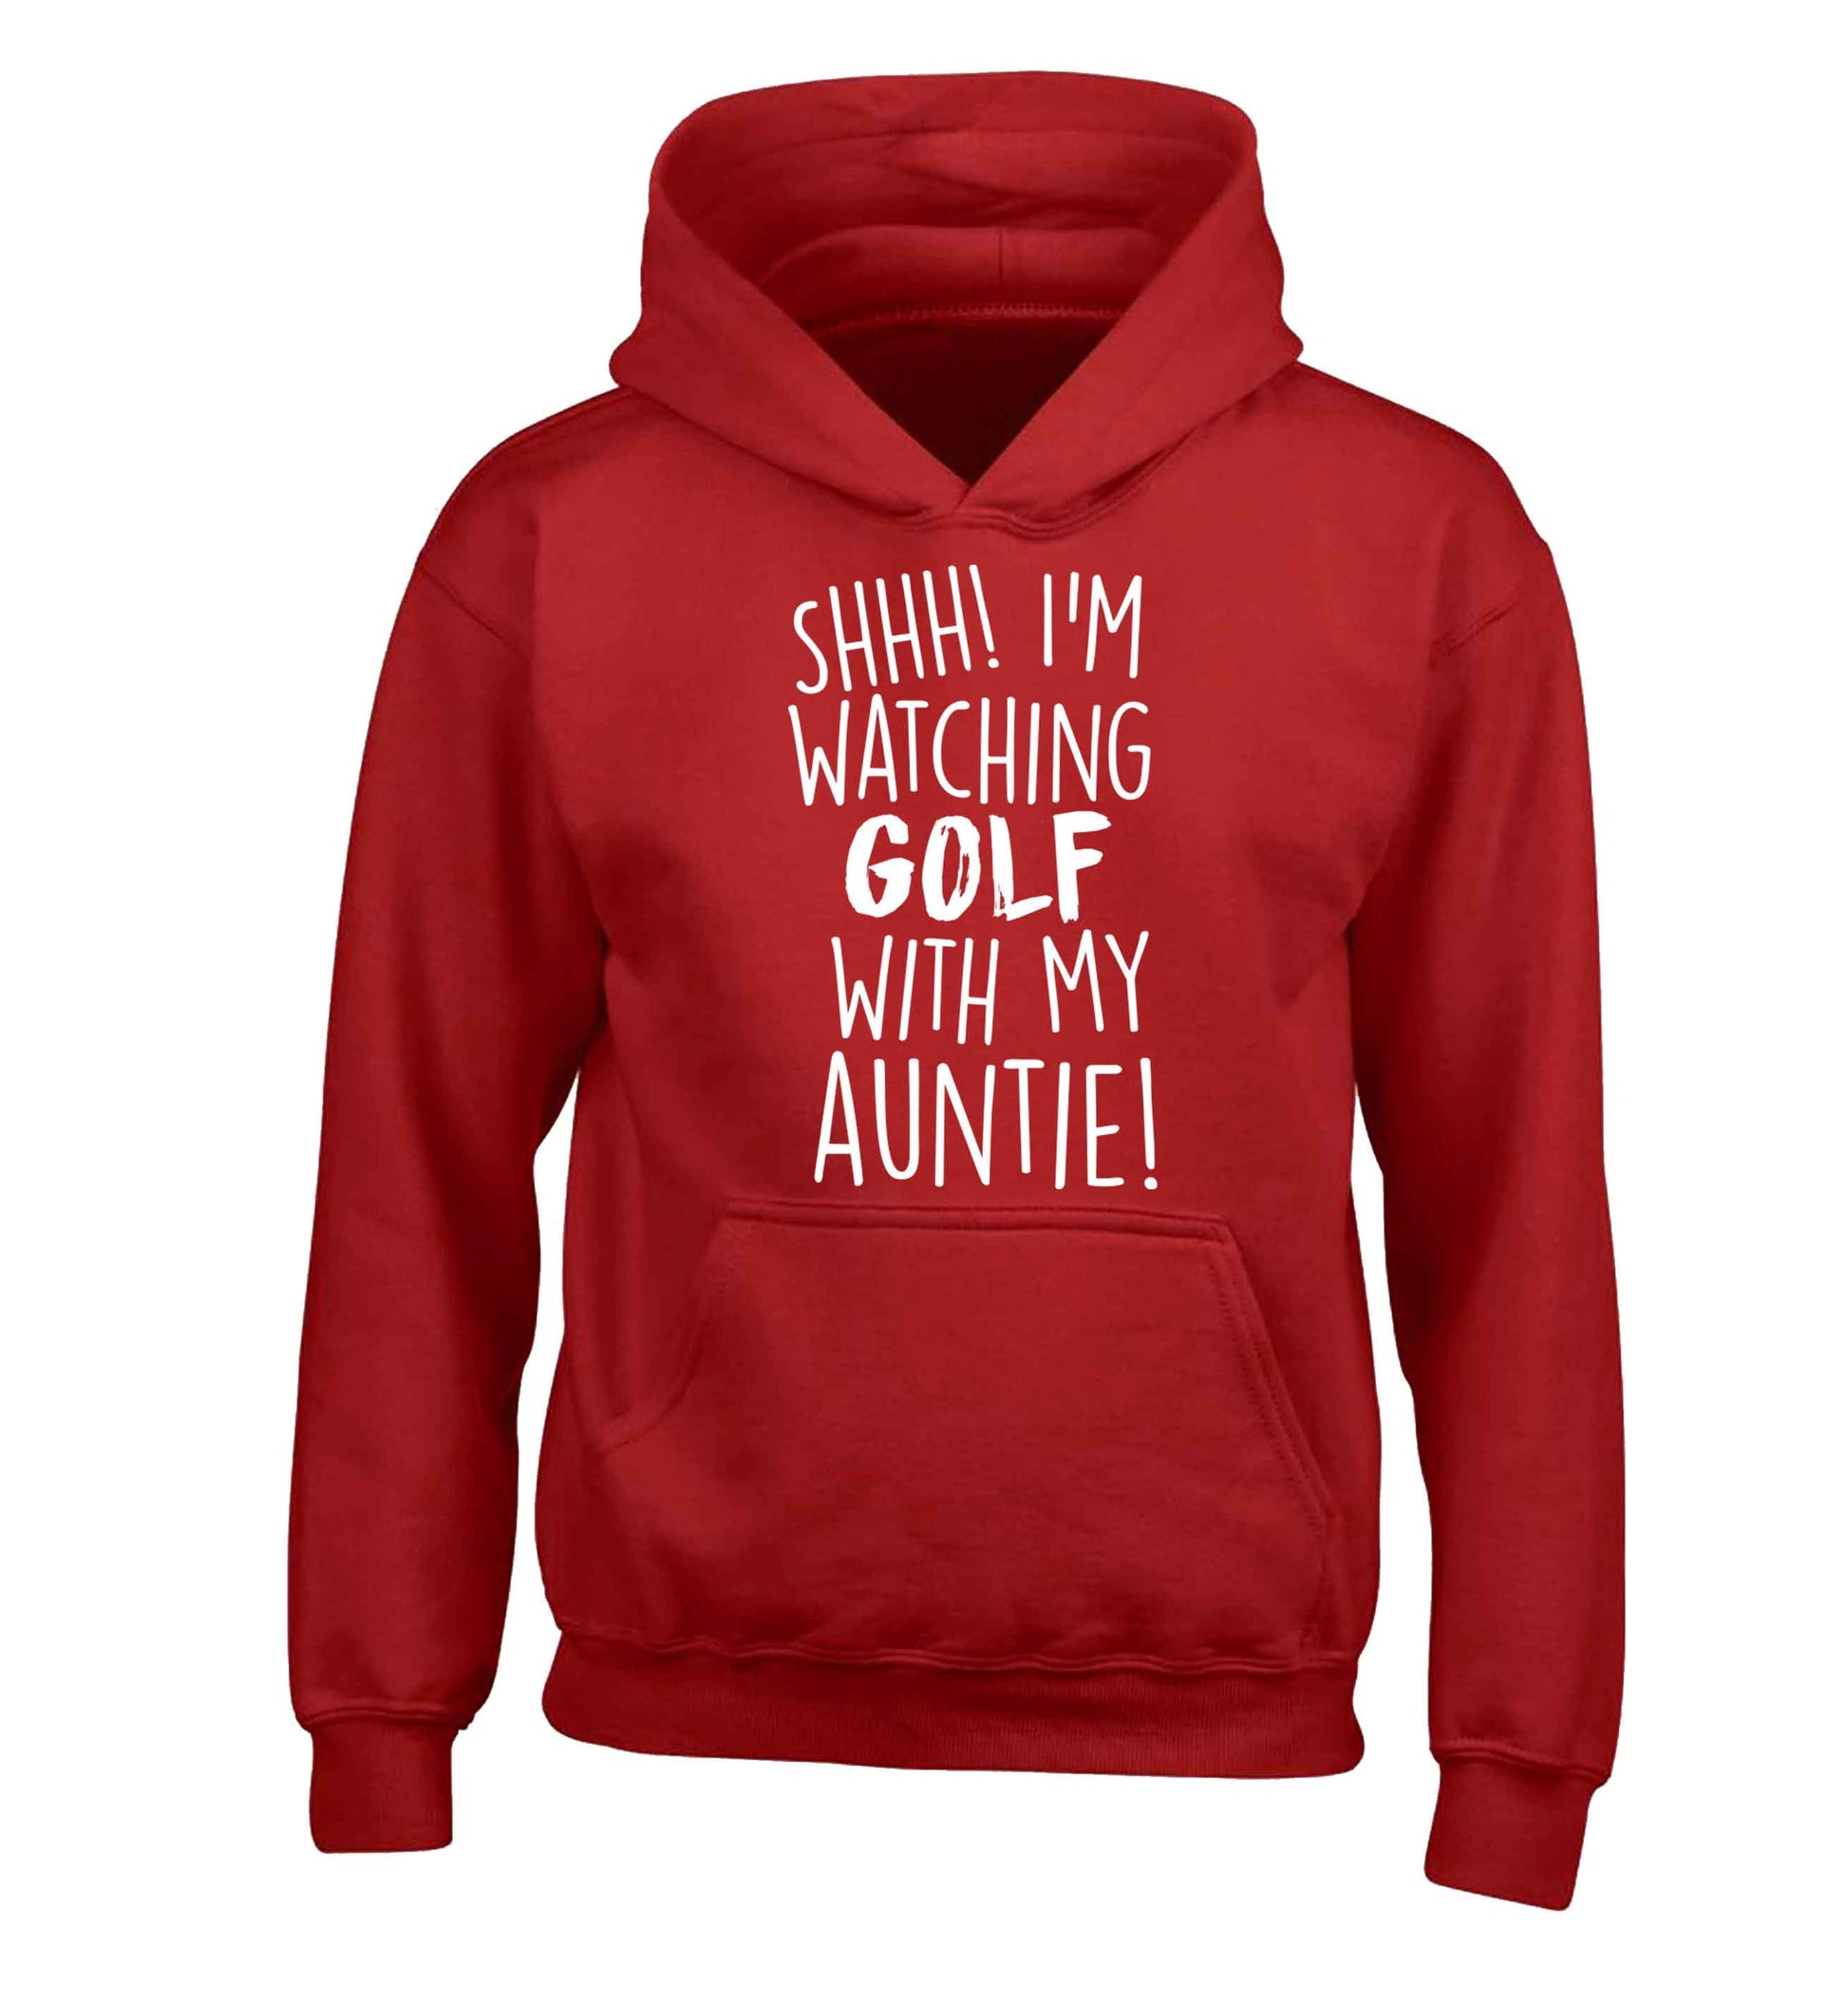 Shh I'm watching golf with my auntie children's red hoodie 12-13 Years